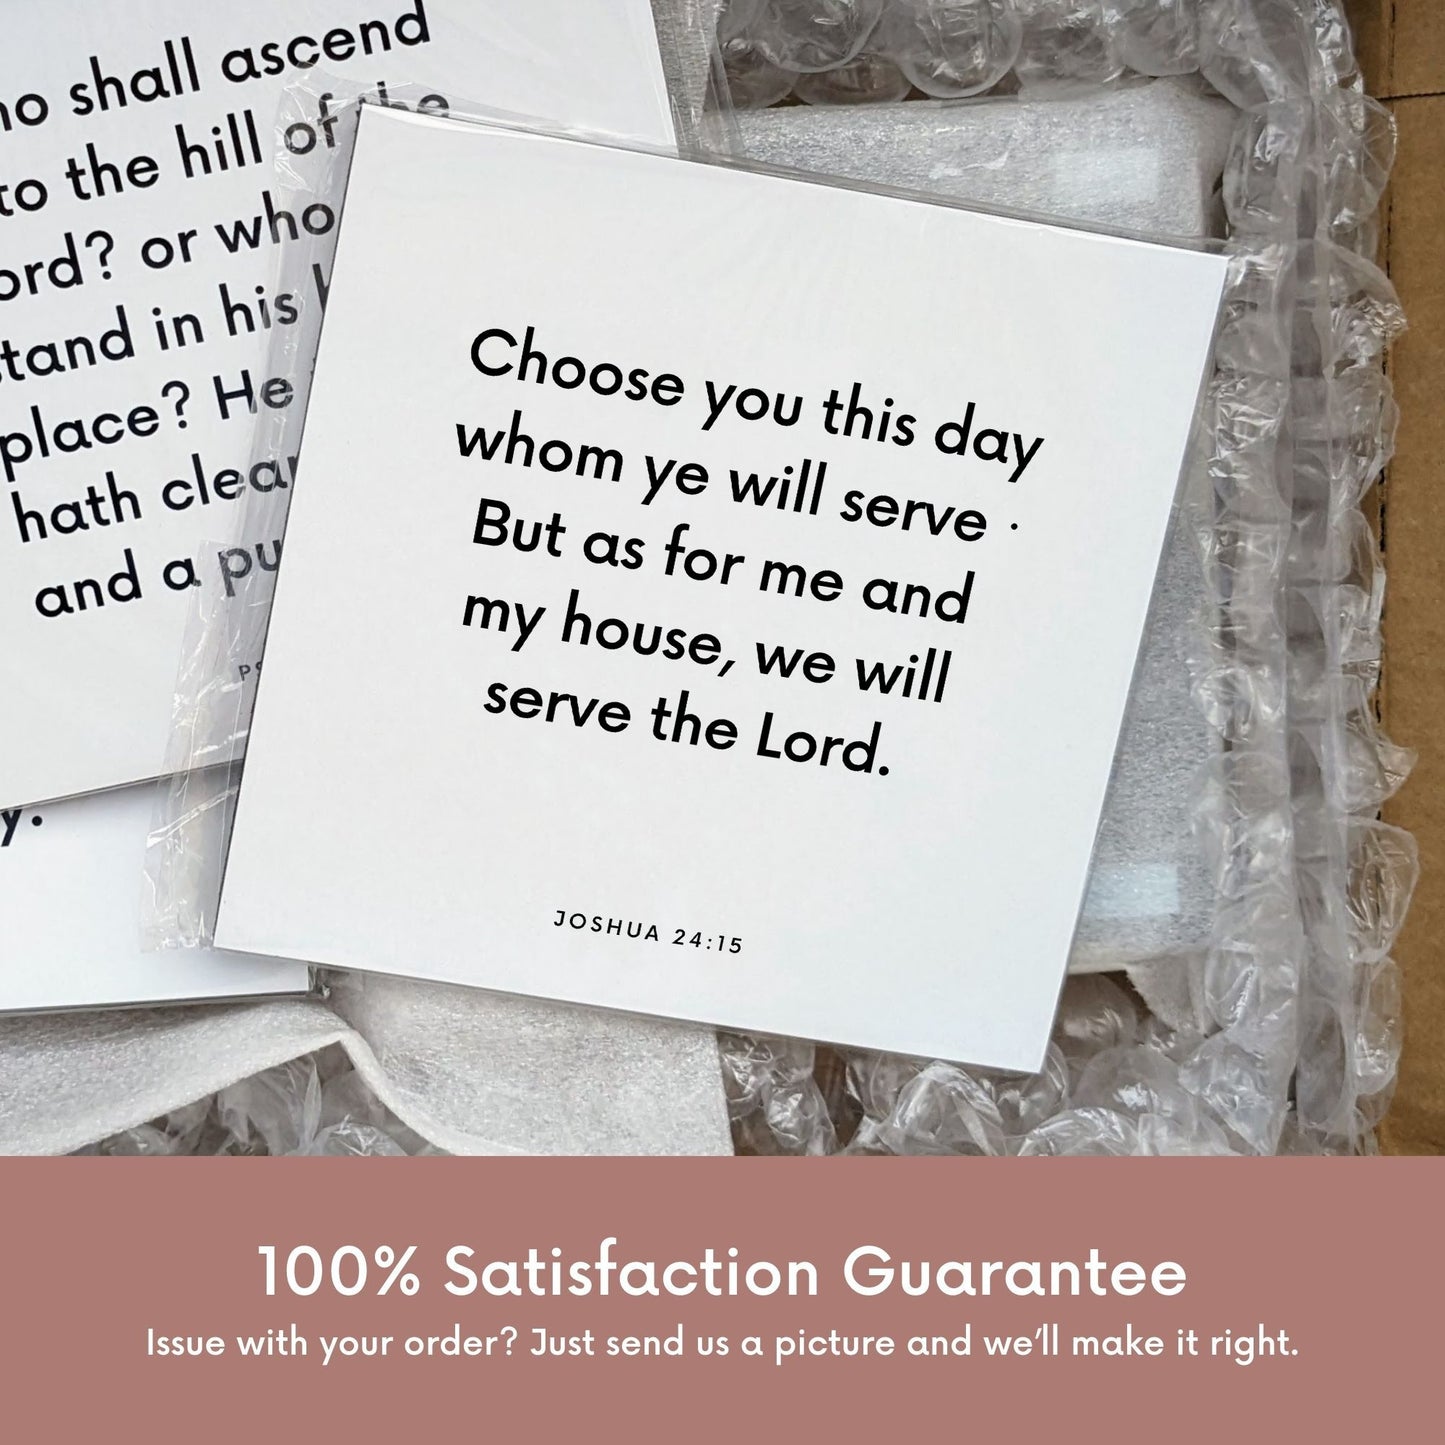 Shipping materials for scripture tile of Joshua 24:15 - "Choose you this day whom ye will serve"